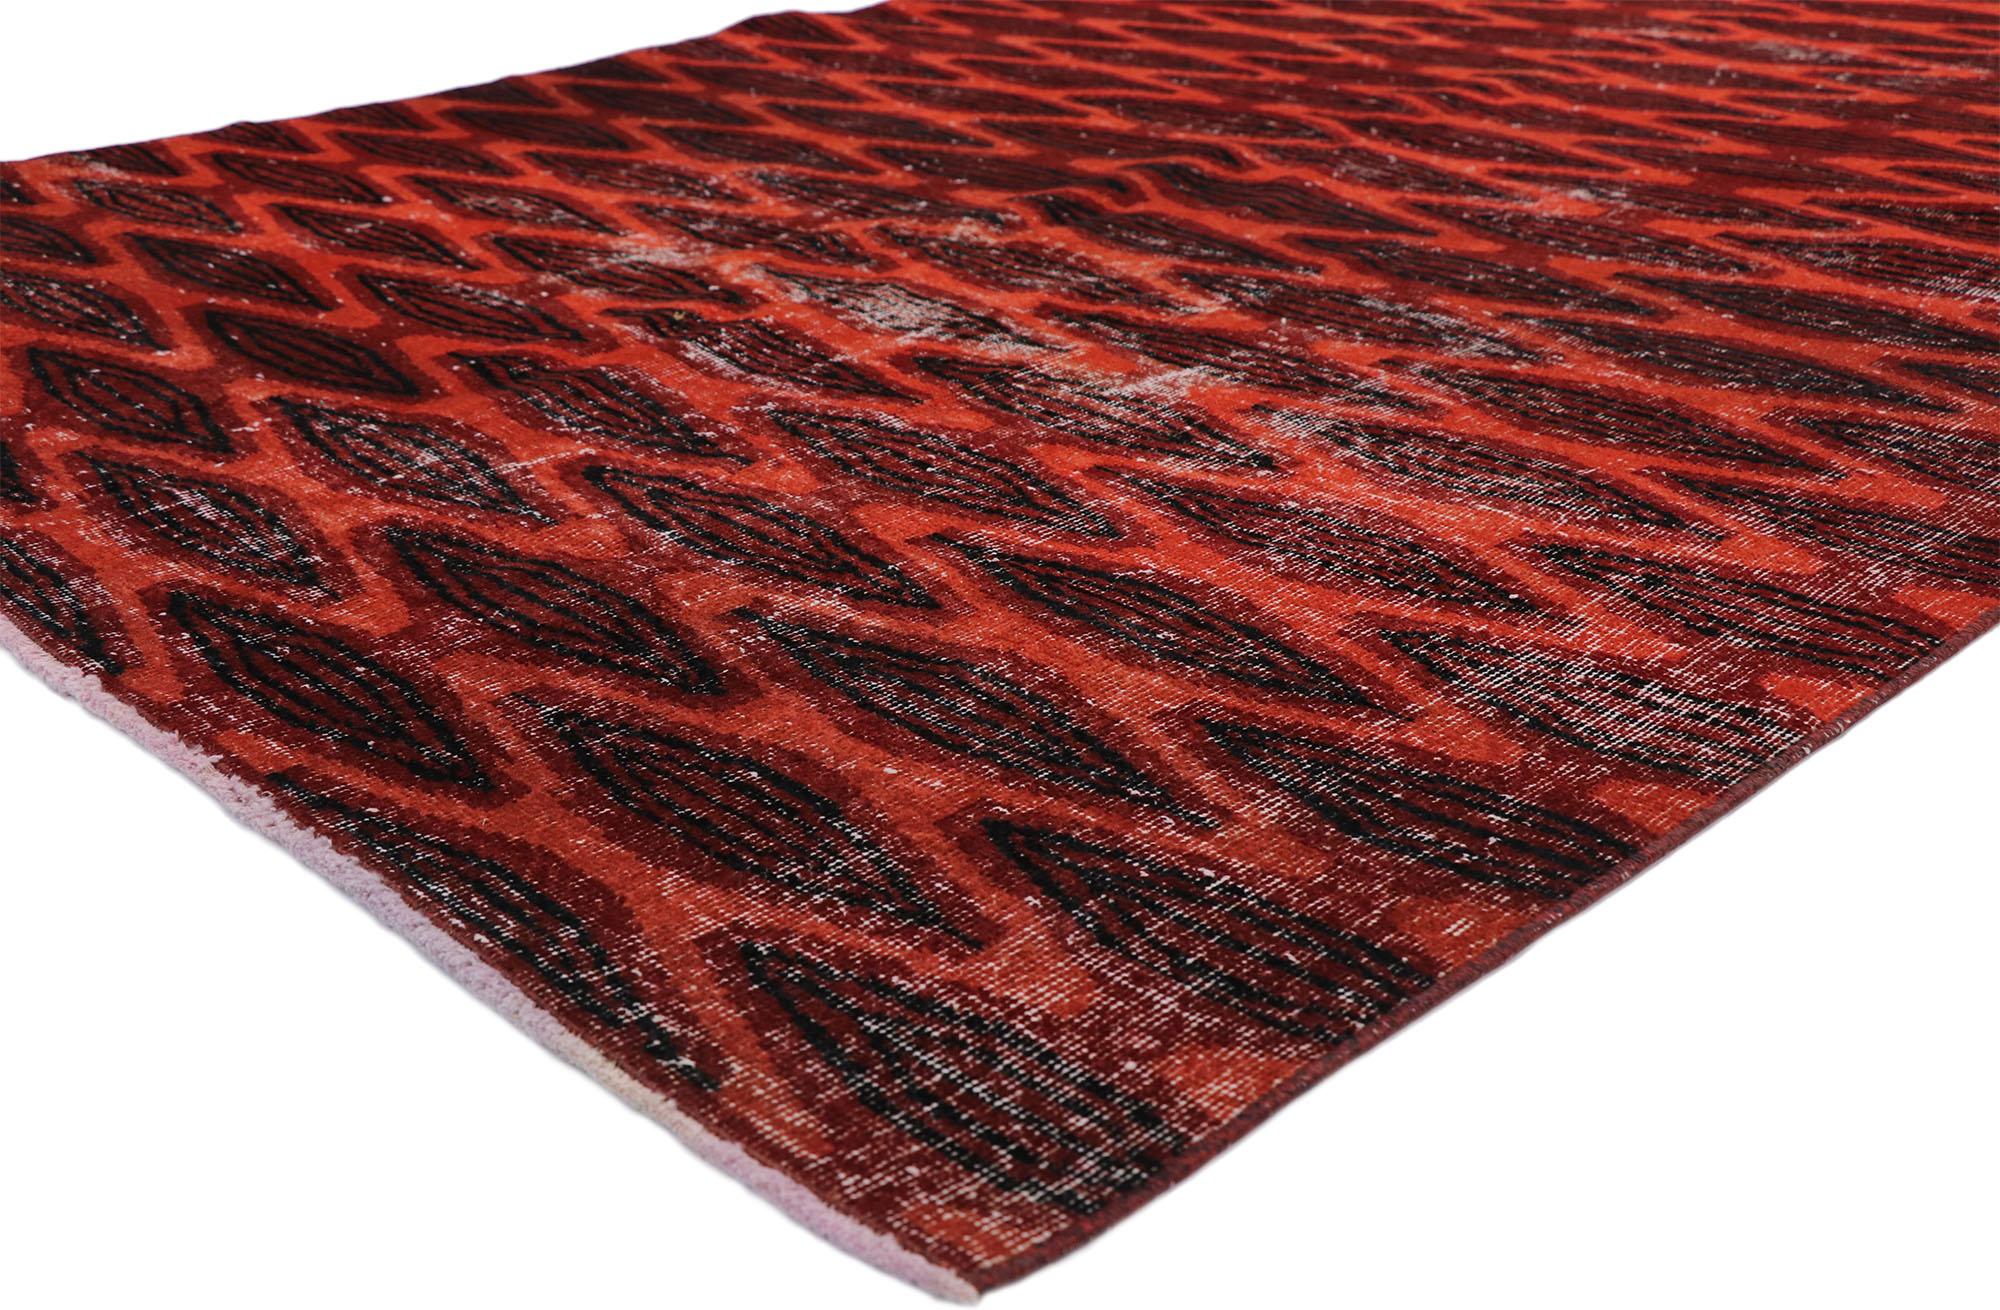 52589, Zeki Muren distressed vintage Turkish Sivas rug with Elizabethan Art Deco style. This hand knotted wool distressed vintage Turkish Sivas rug features an all-over diamond lattice pattern spread across an abrashed red field. Columns of